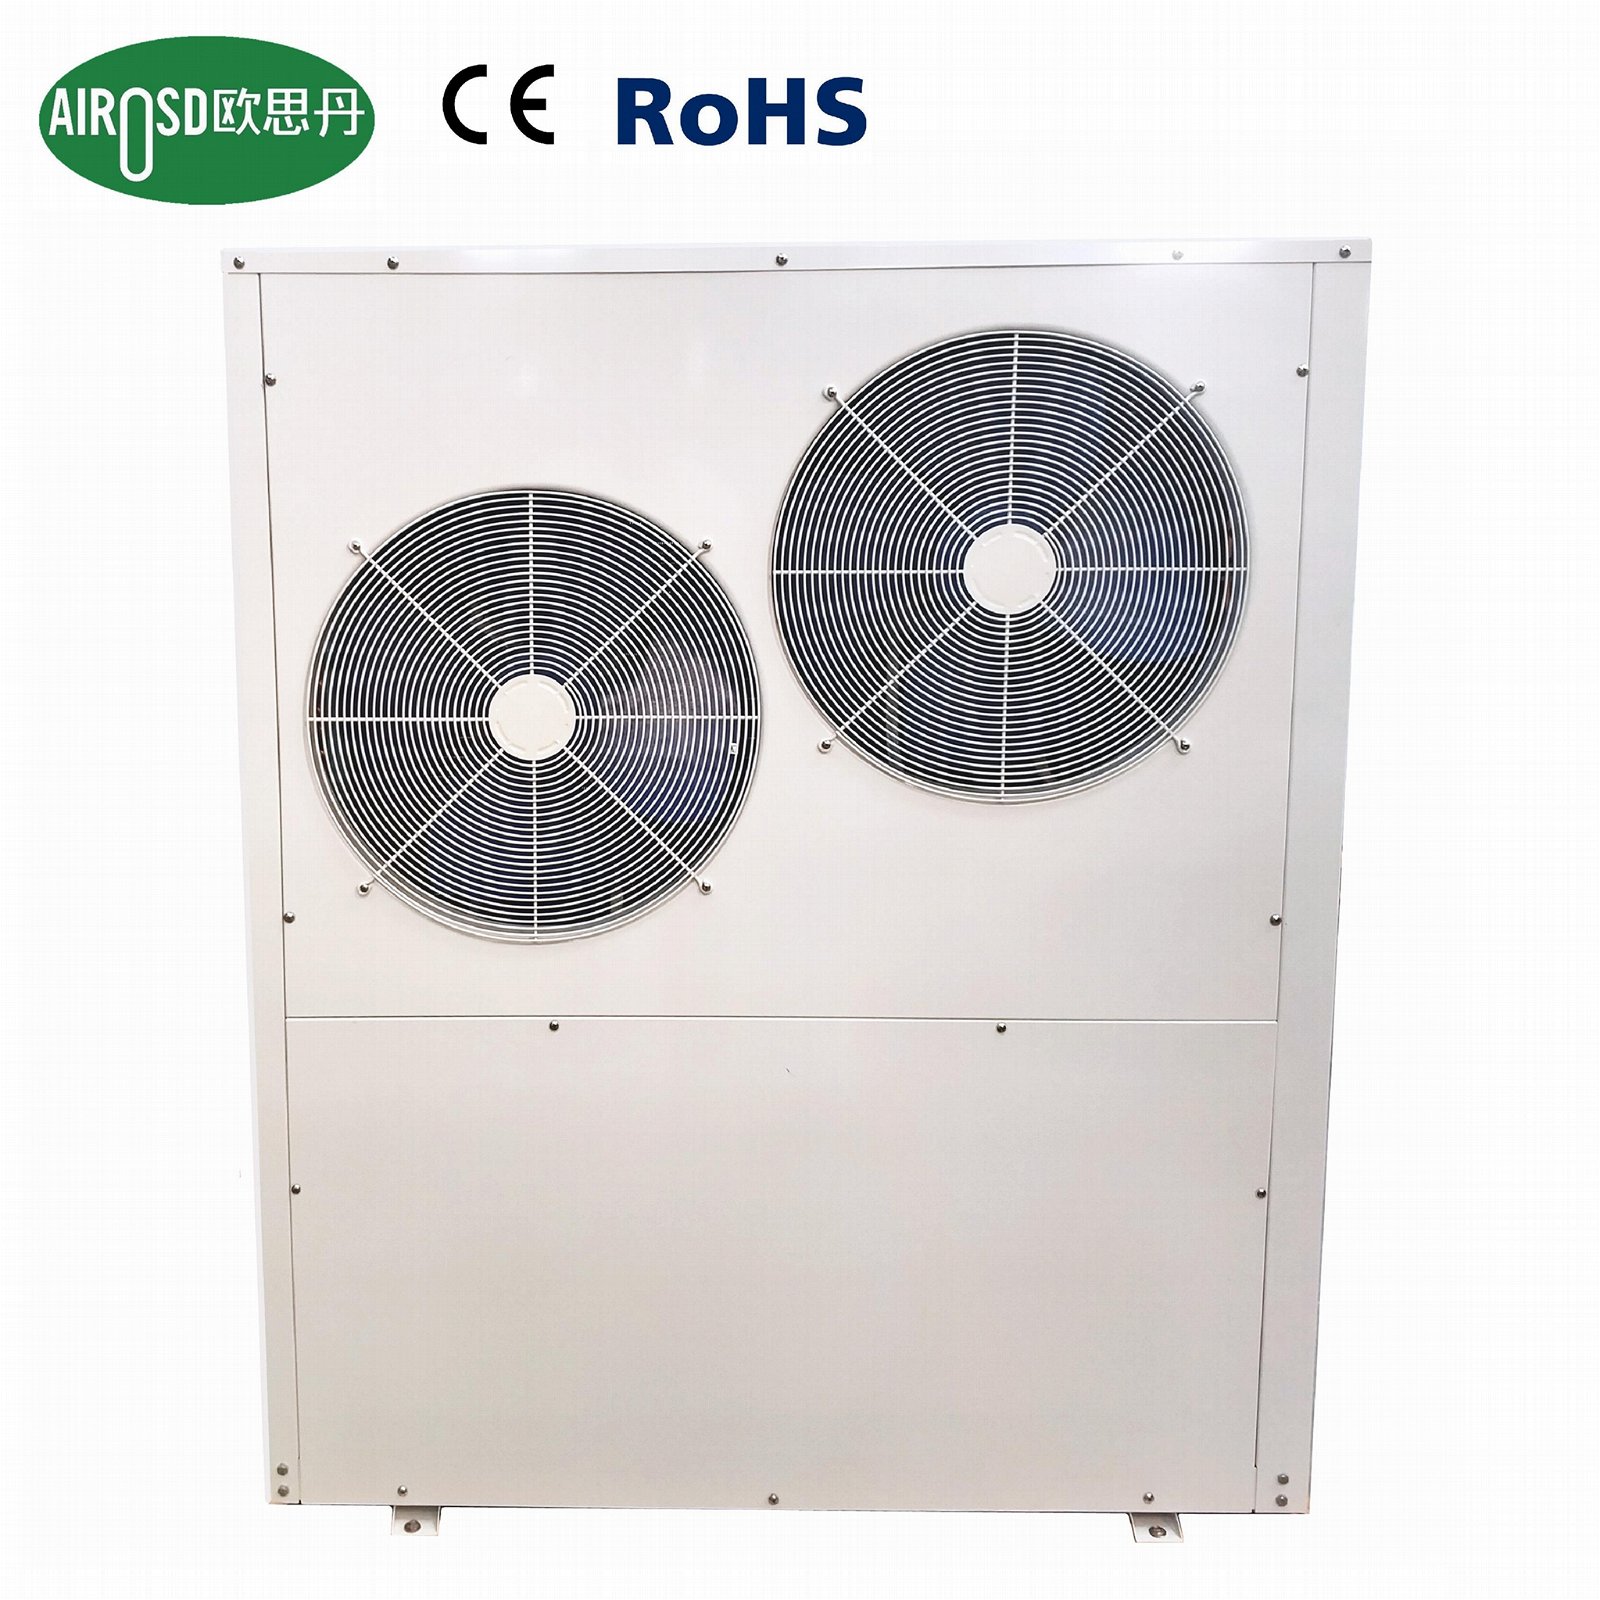 EVI low ambient temperature heating cooling heat pump 18.5 KW 3